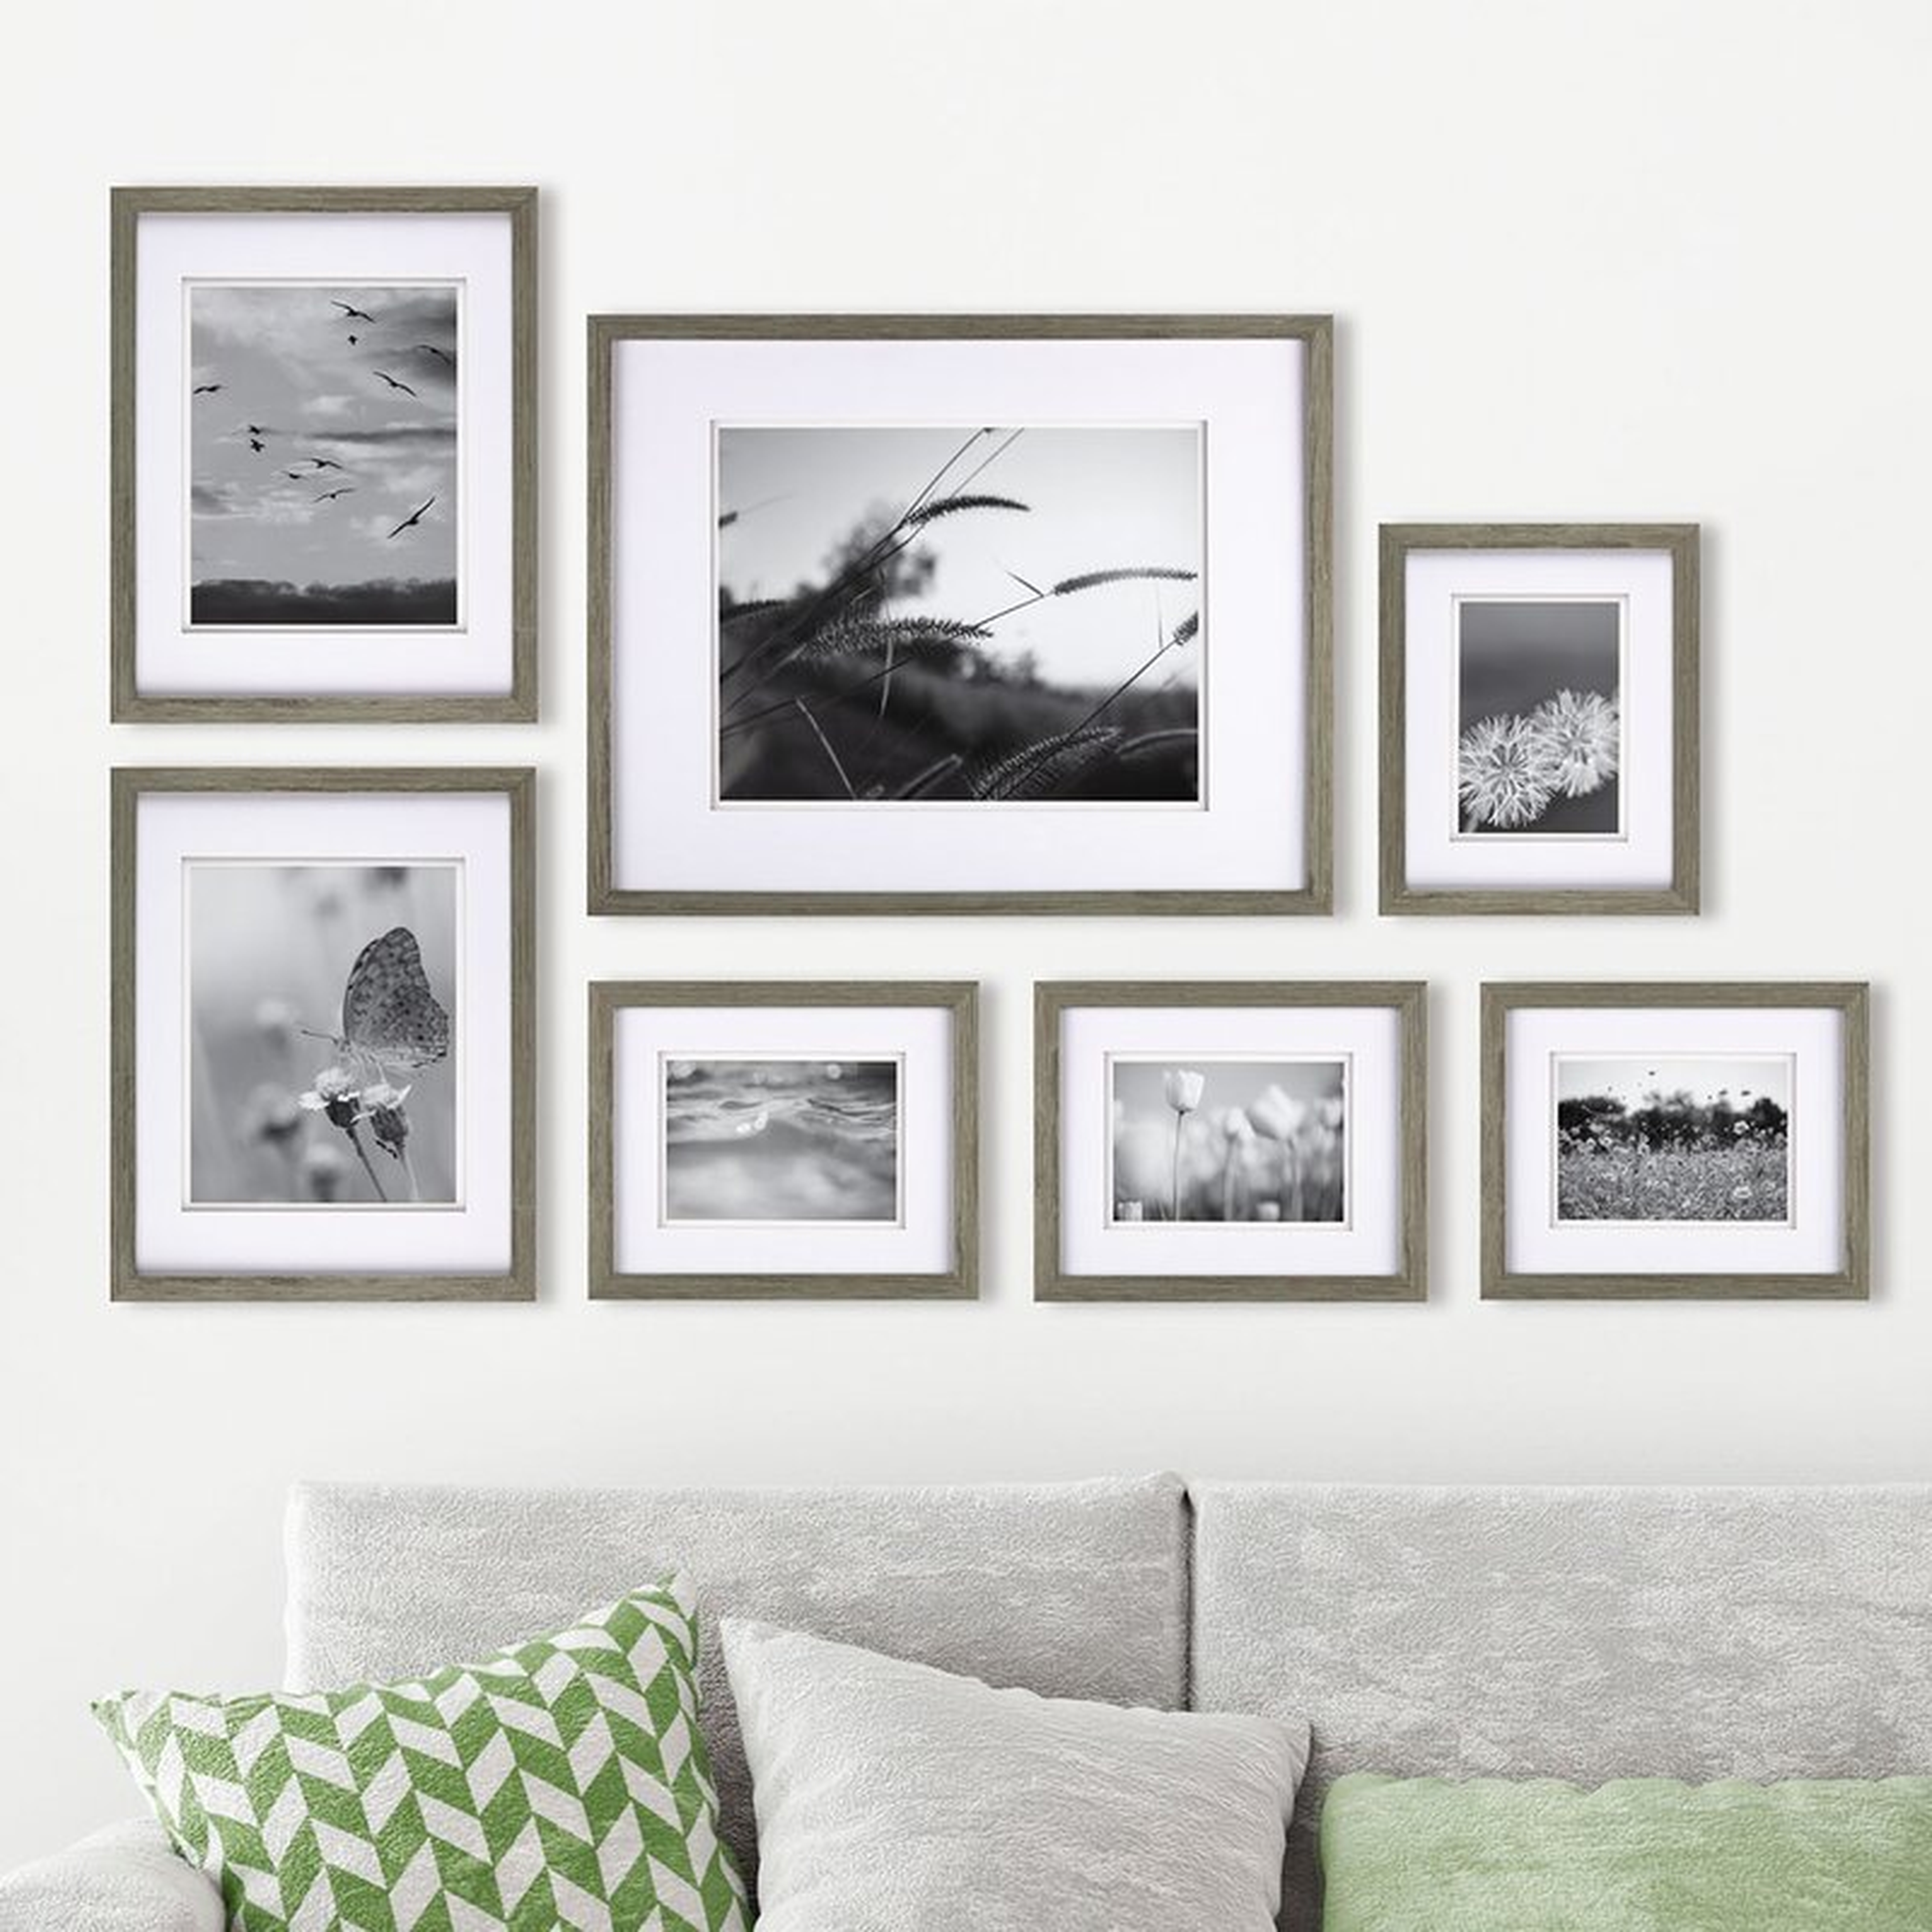 Goin 7 Piece Build a Gallery Wall Picture Frame Set - gray - Wayfair